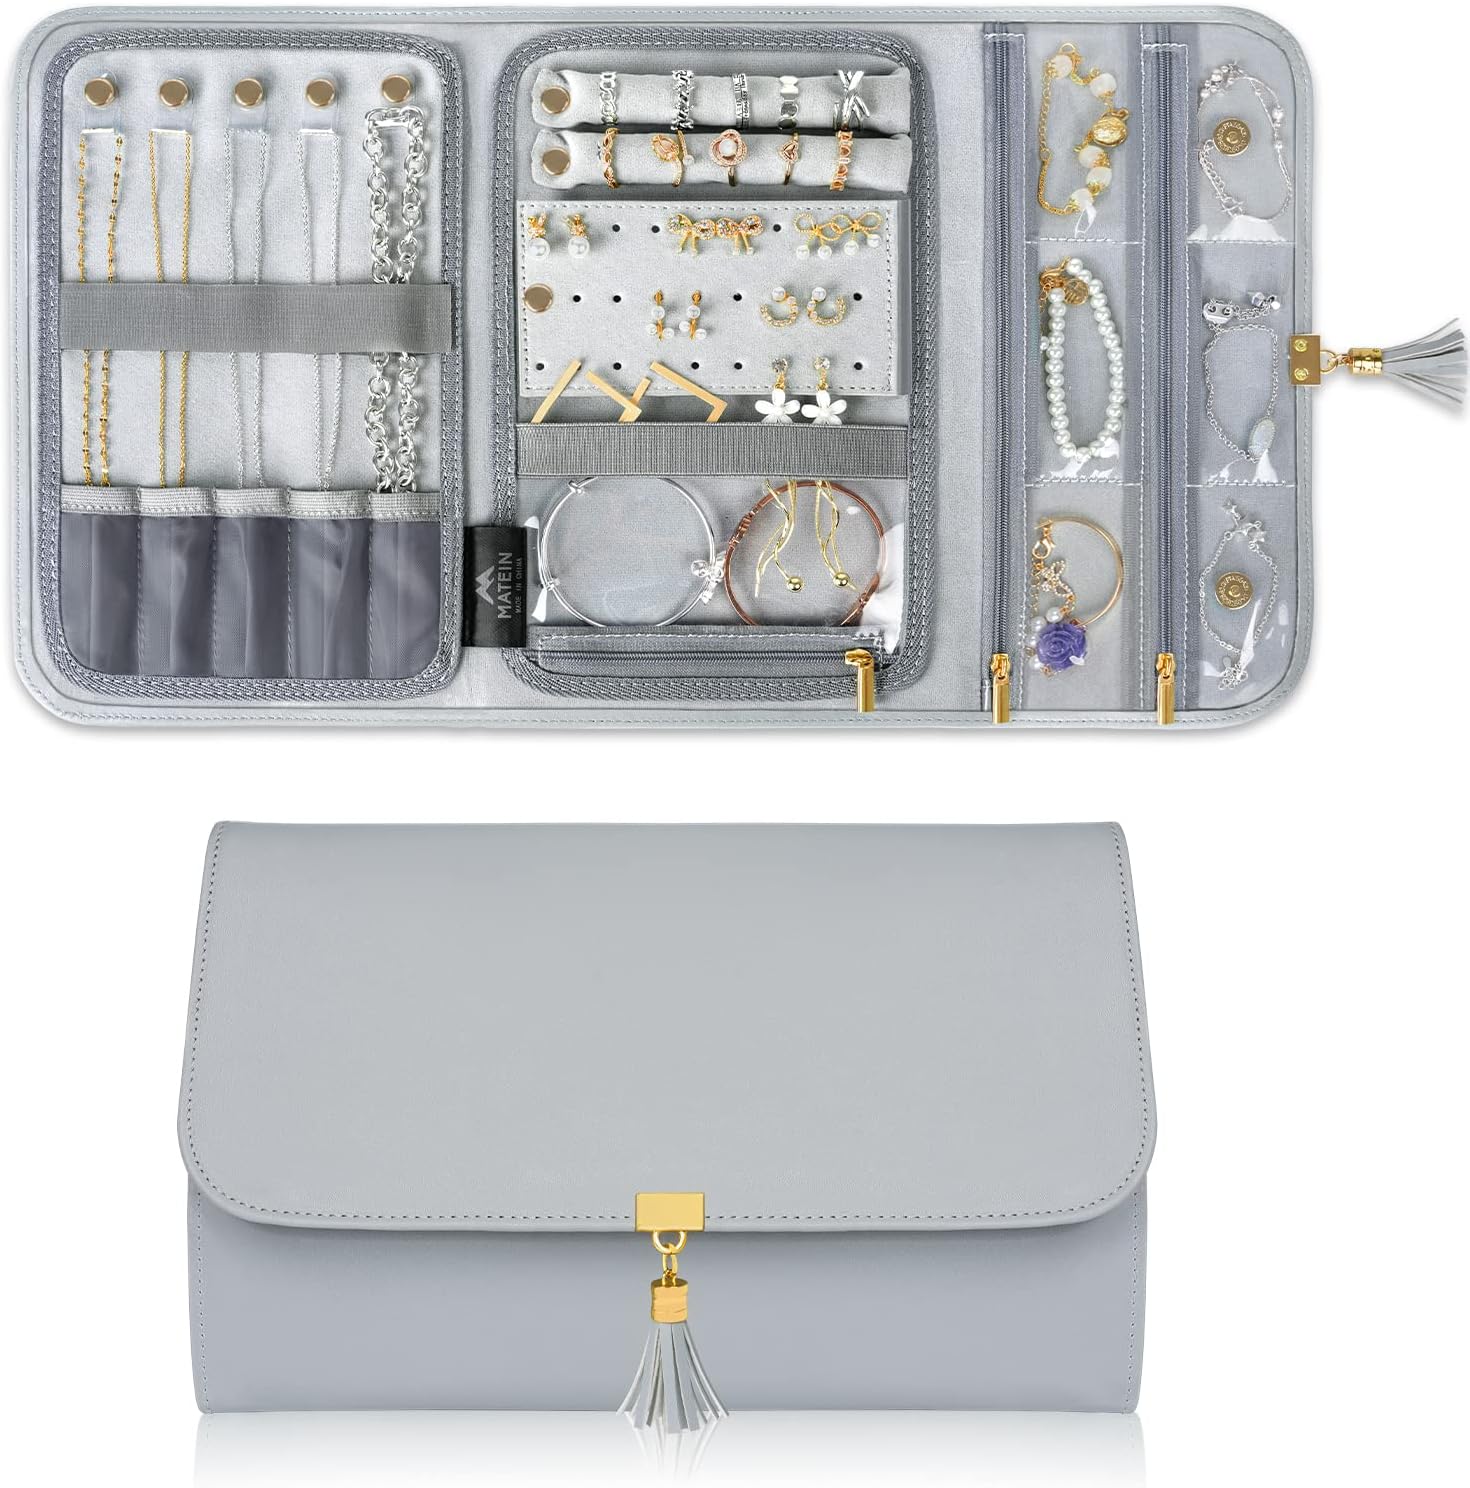 Blushbees® Compact Travel Jewelry Case in Blue